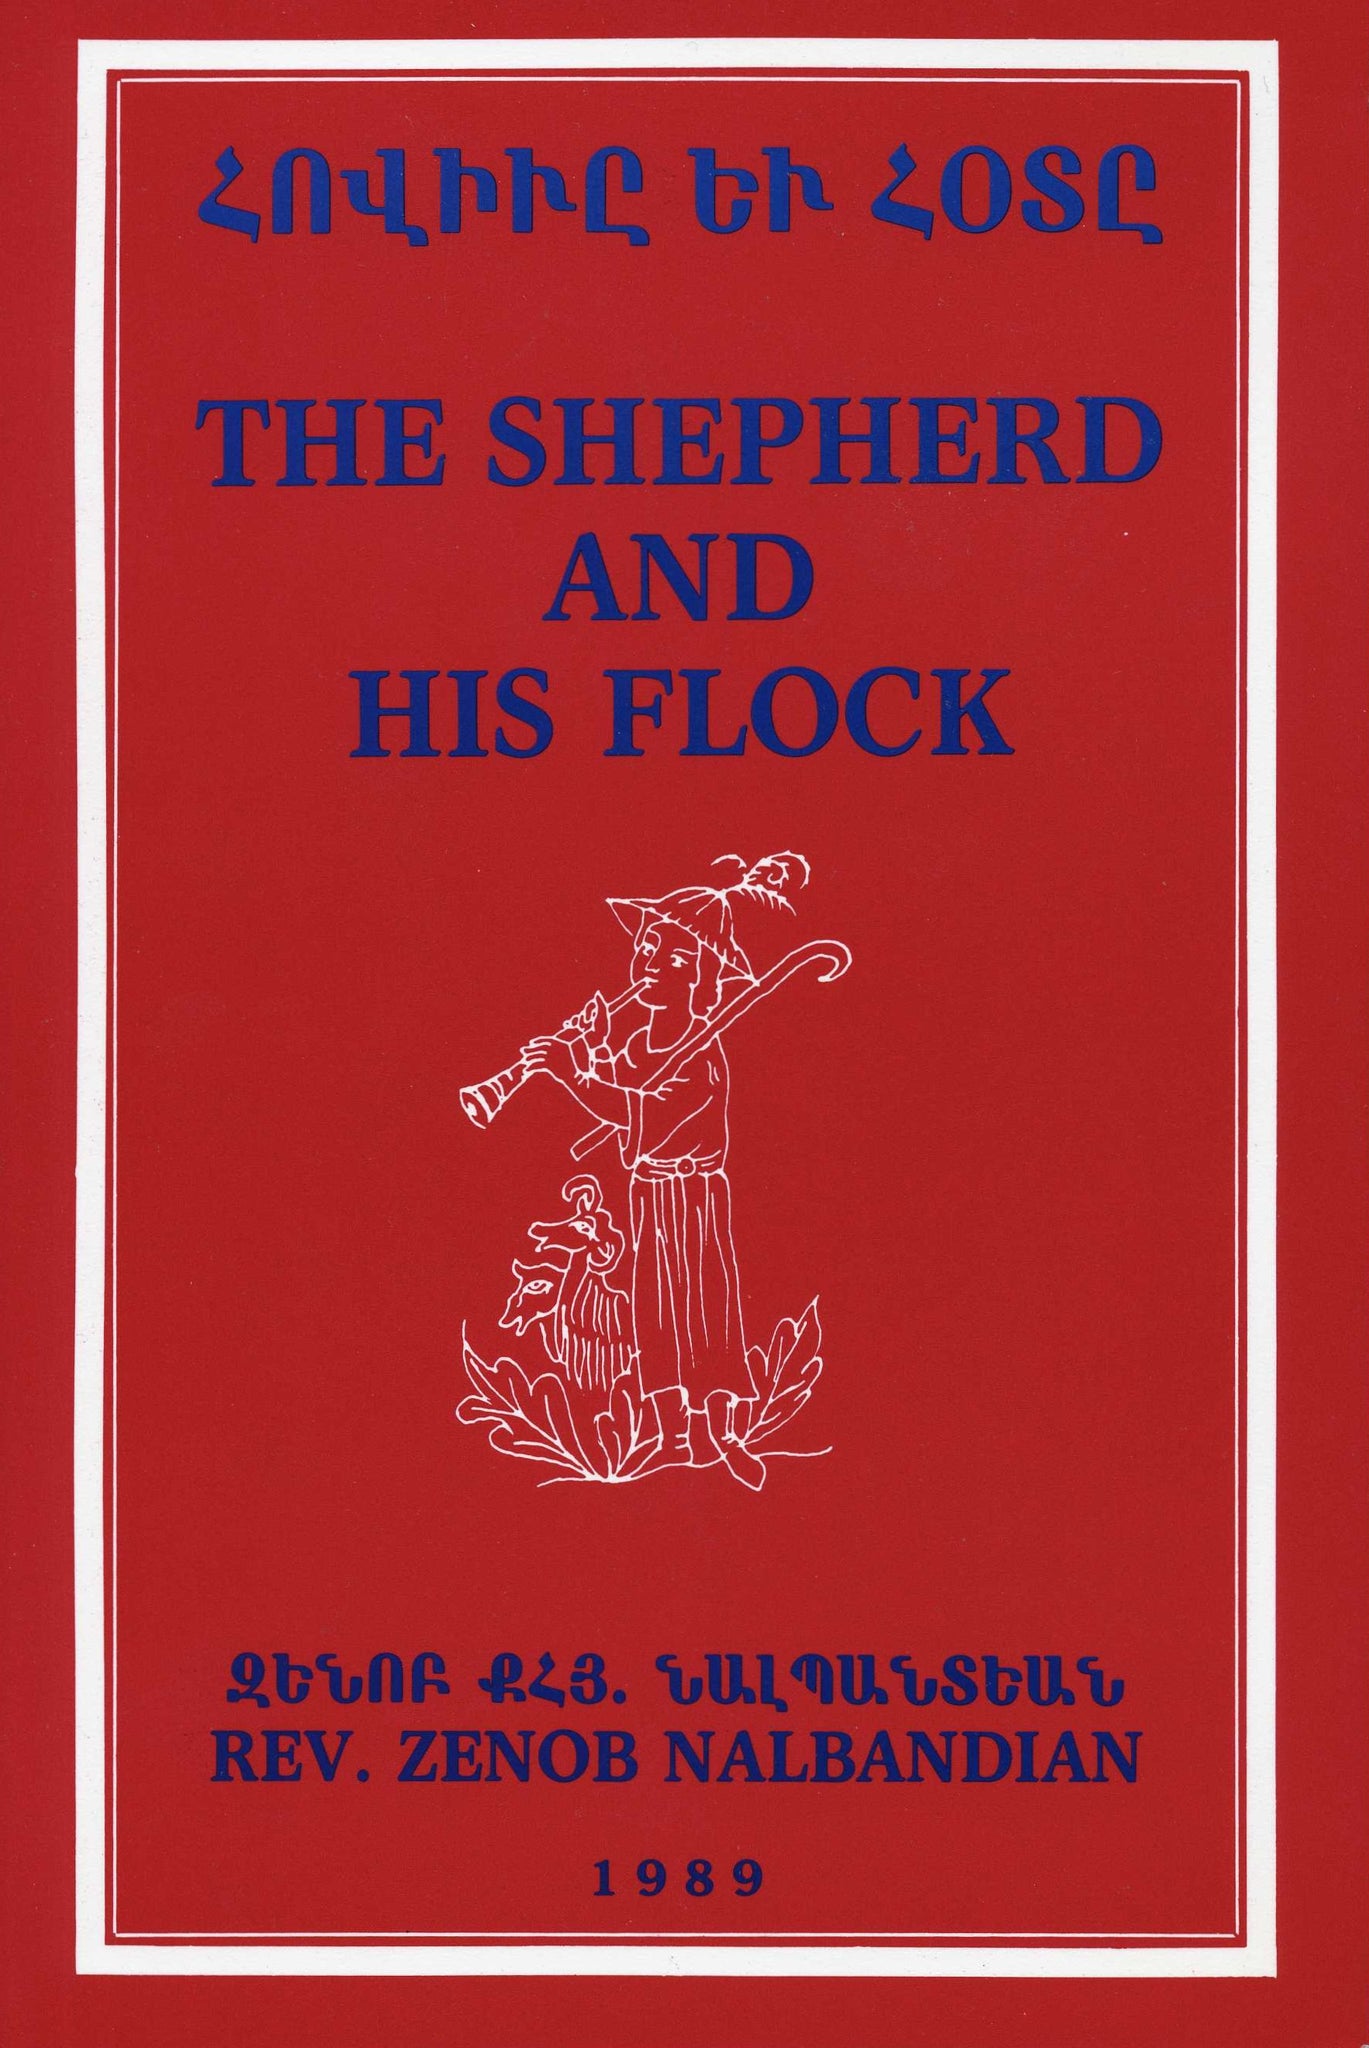 SHEPHERD AND HIS FLOCK, THE